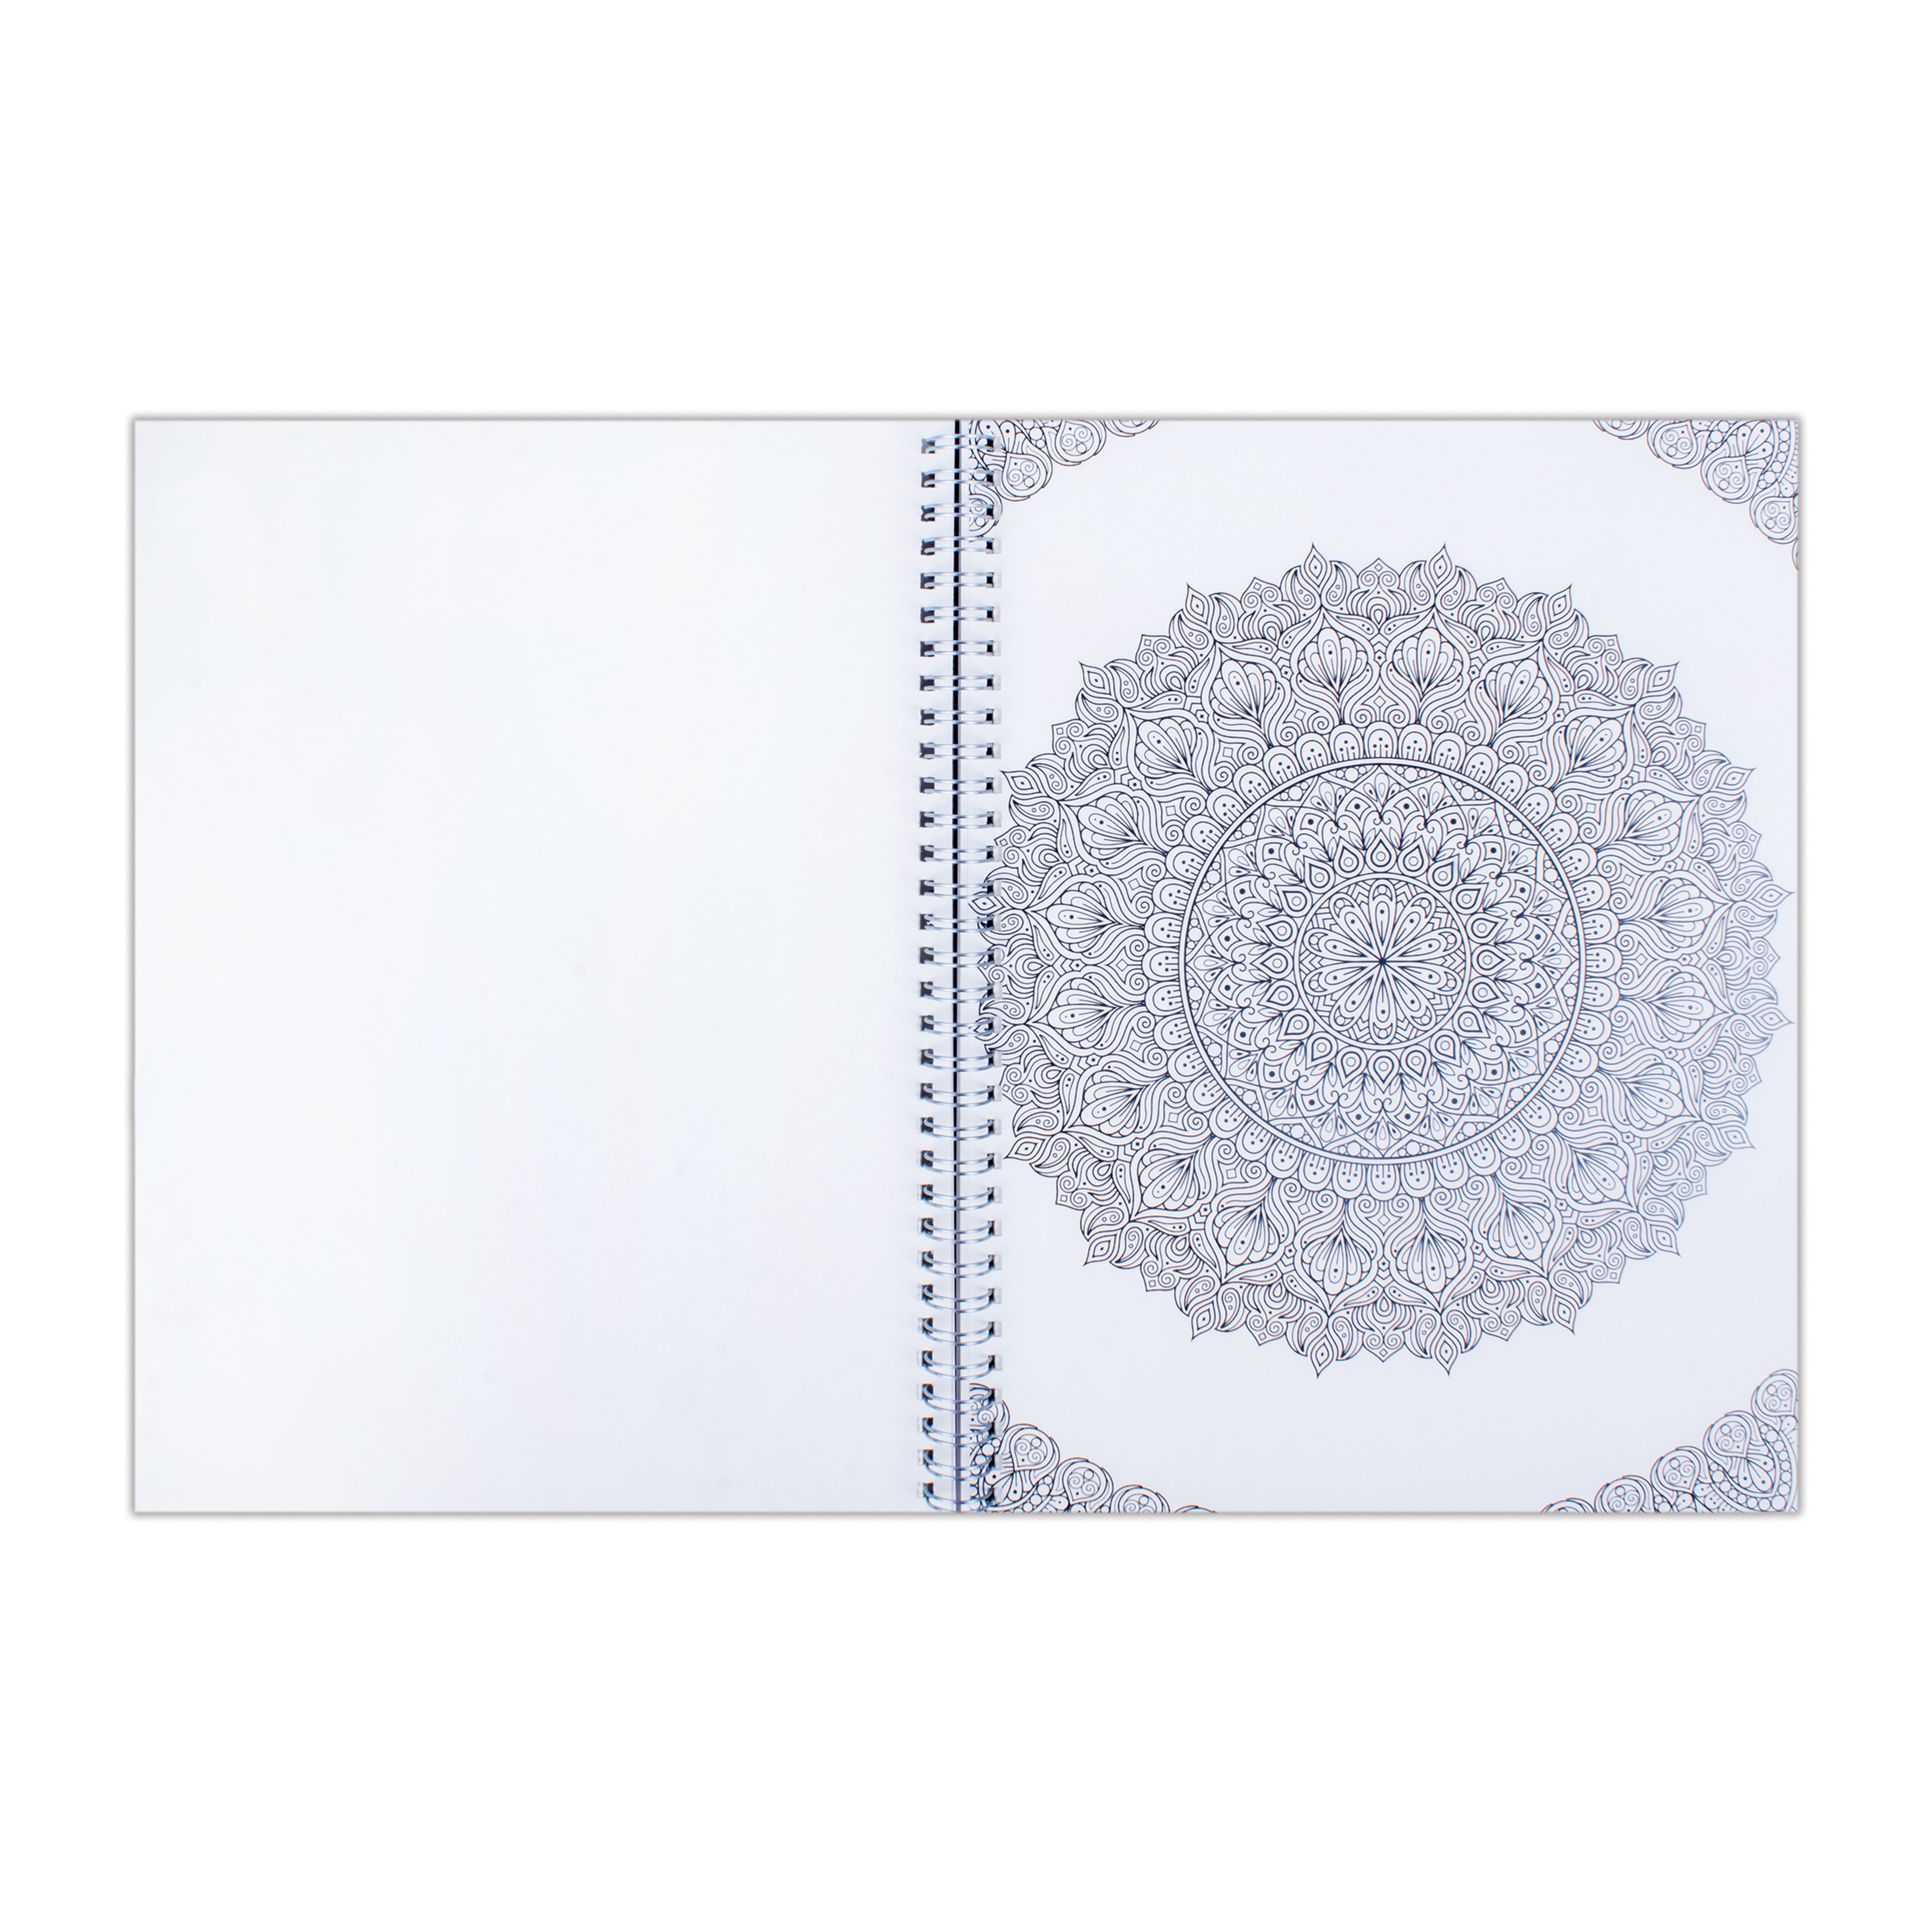 Mystic Mandalas Sketchbook Spiral Bound Two Printed Sheets In Side Artist Paper A4 115gsm 25Sheets 1 Book